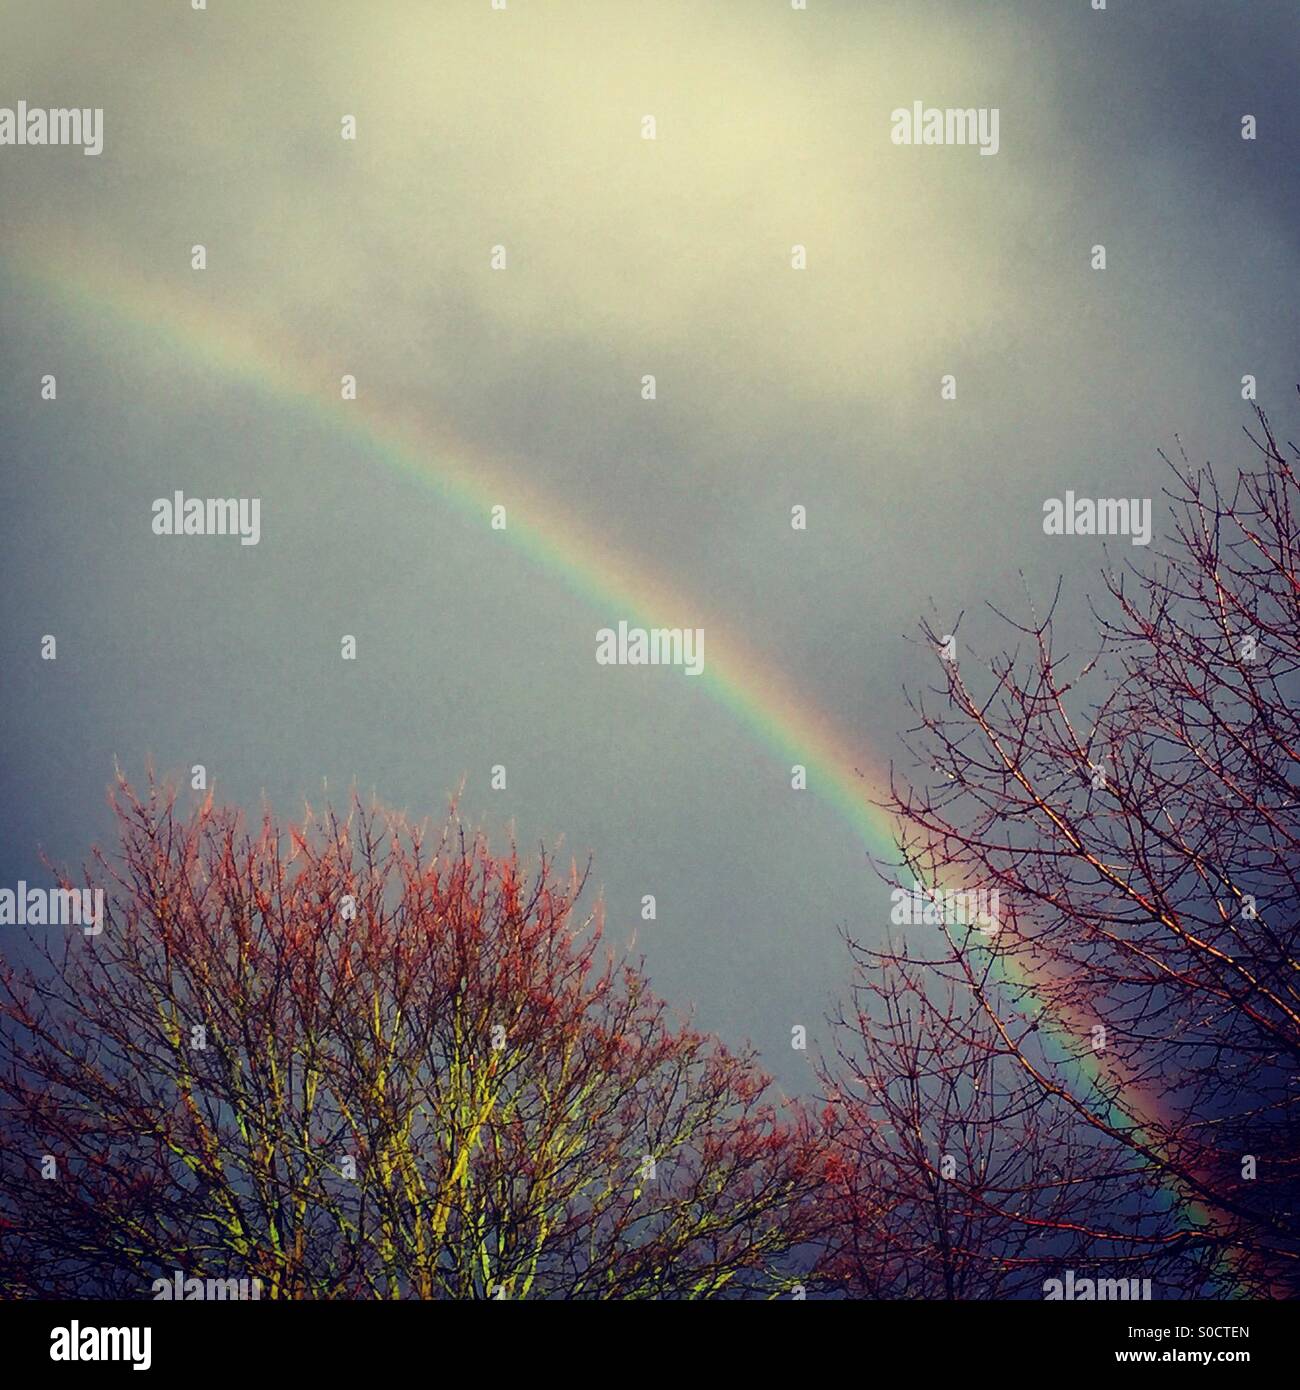 Bright rainbow in front of dark storm clouds Stock Photo